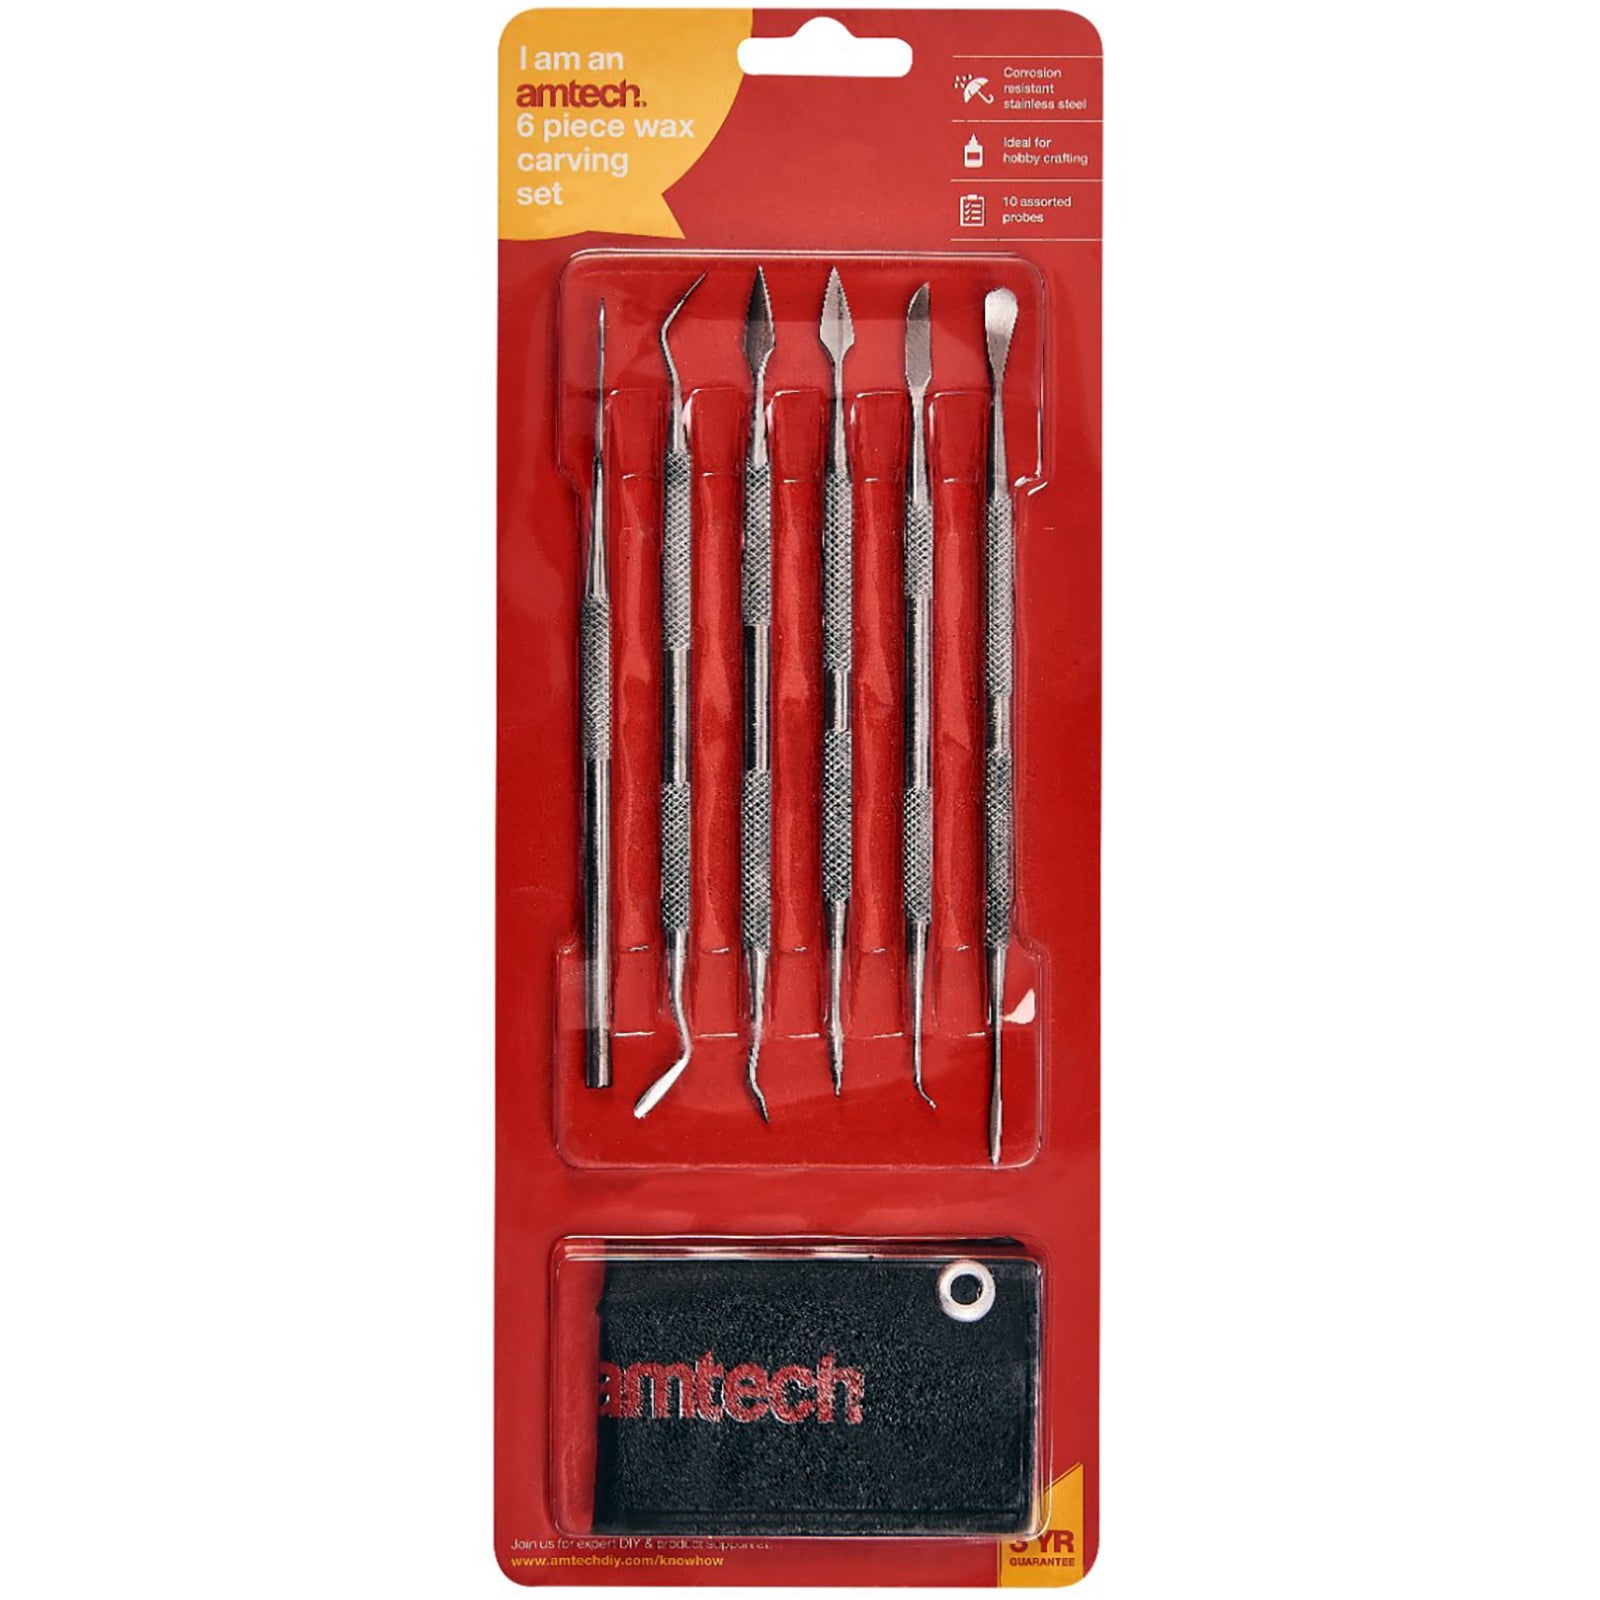 Amtech 6 Piece Stainless Steel Wax Carving Set